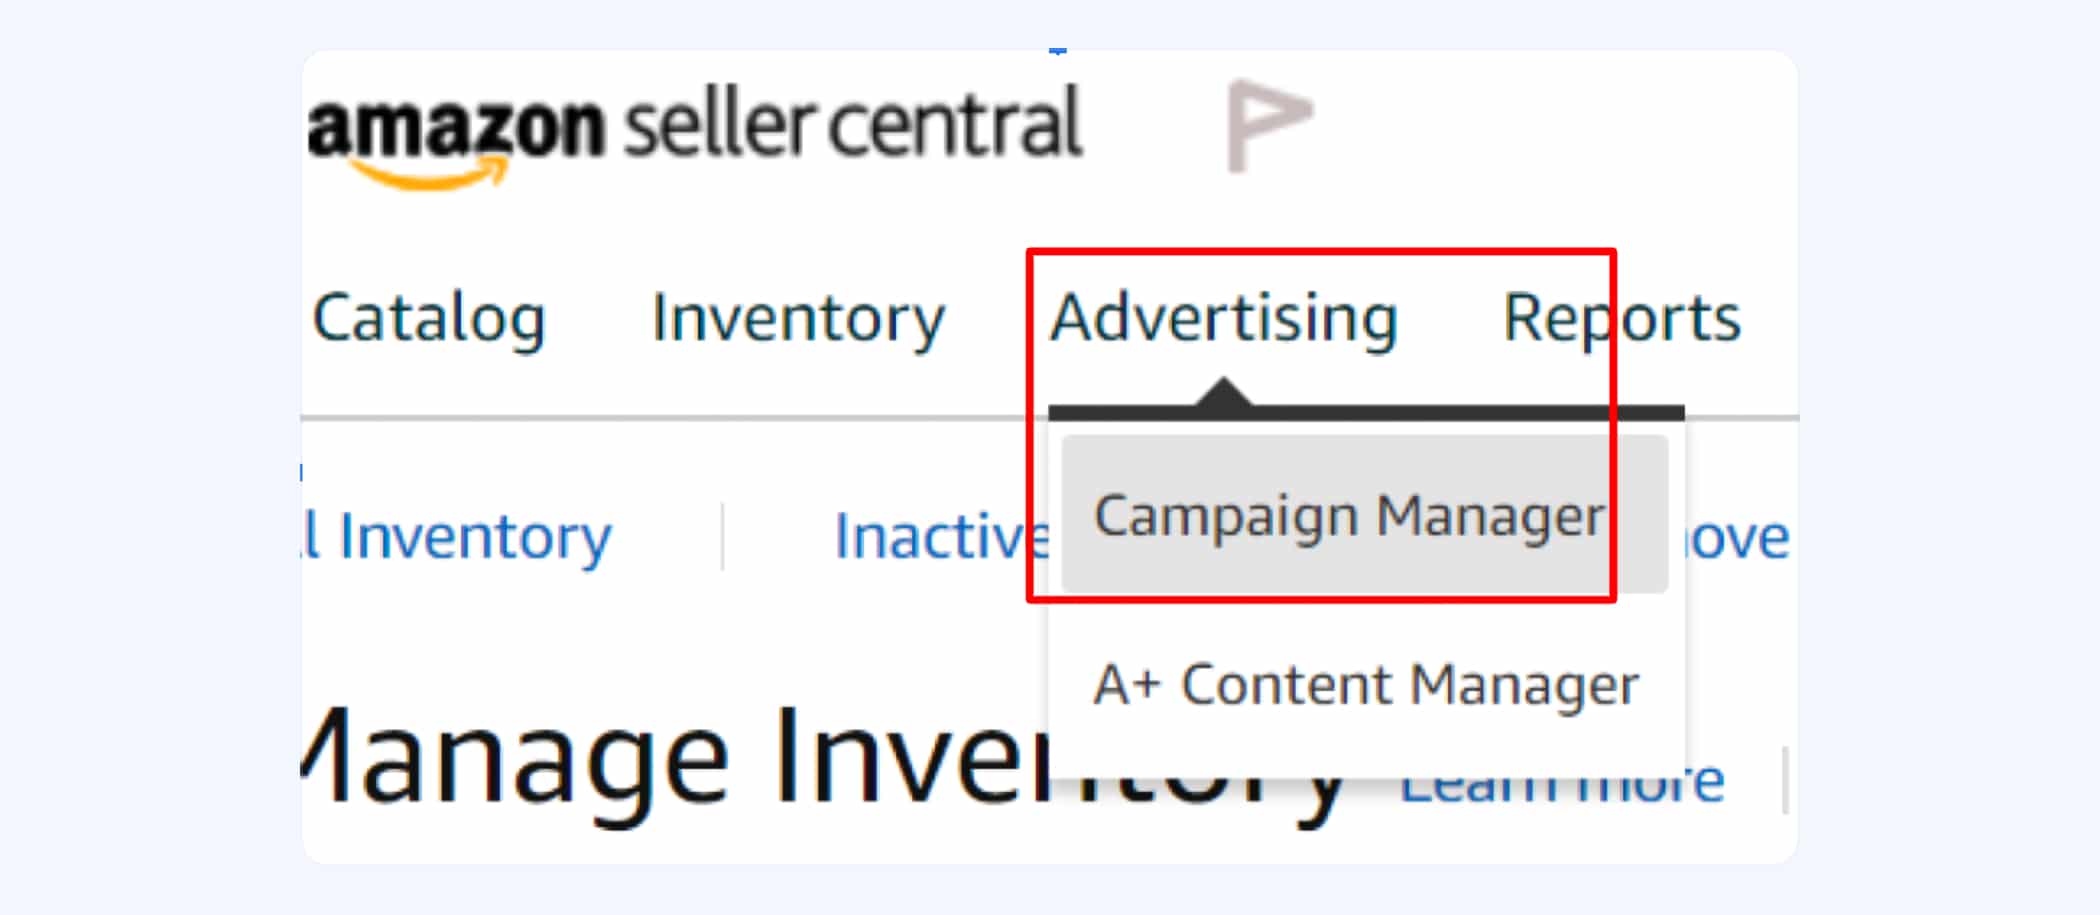 Advertising Campaign Manager